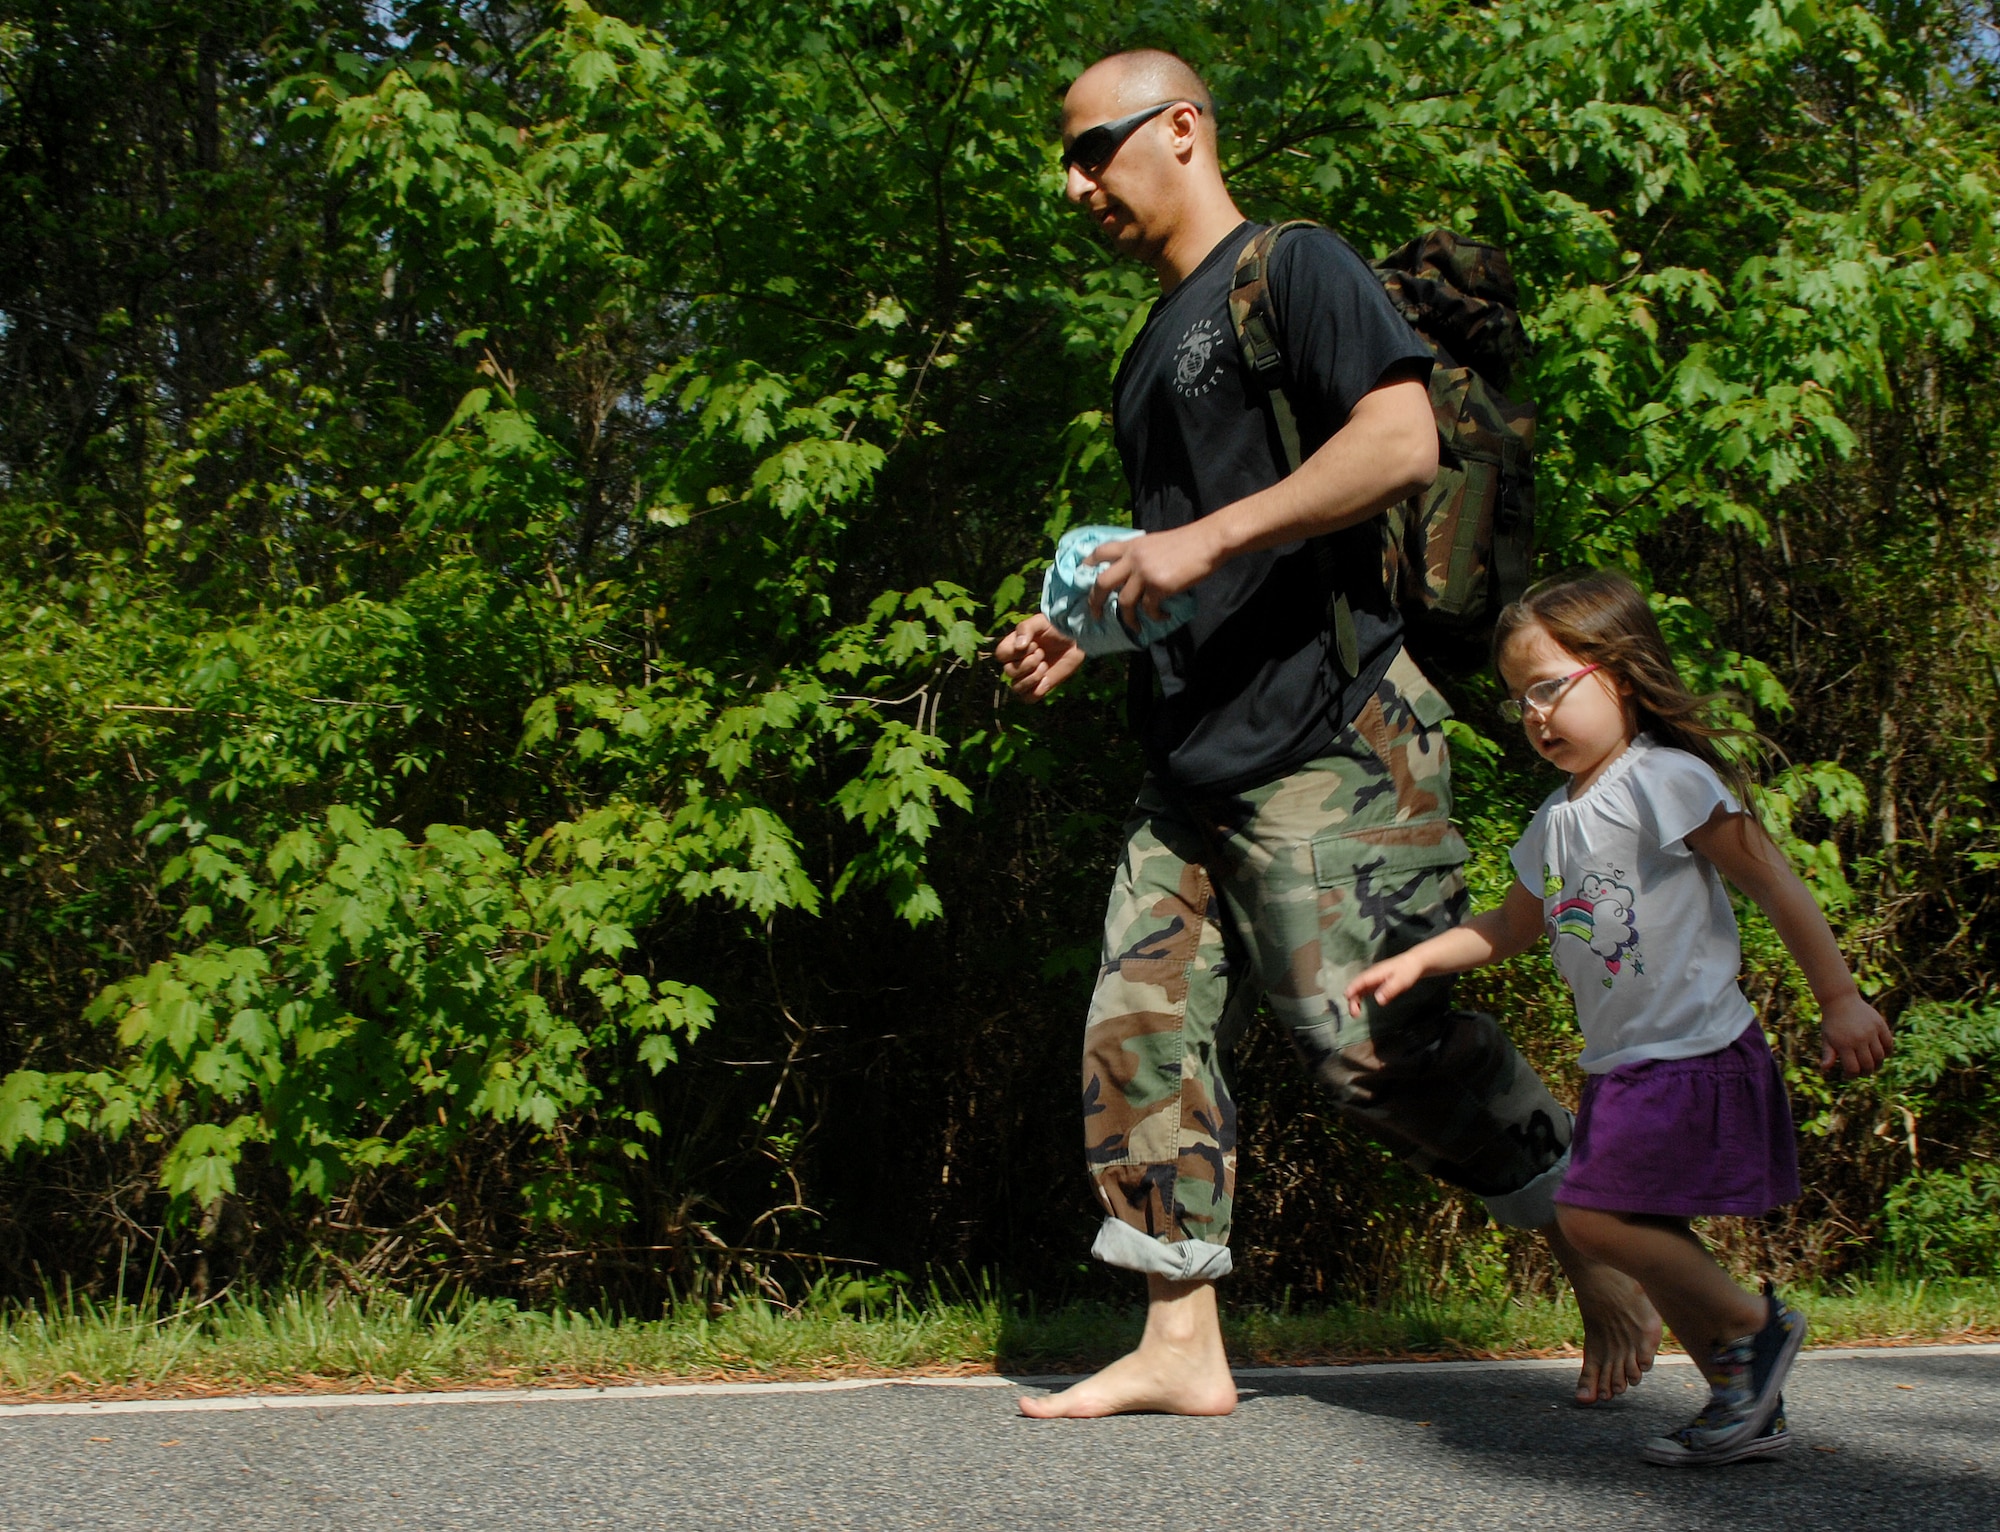 A runner and his daughter participate in the 1-mile portion of the Bataan Death March memorial walk at Chesapeake, Va., April 27, 2013. In addition to the 16.6-mile walk, participants could choose to walk or run a shorter five or one-mile distance to honor veterans of the original Bataan Death March. (U.S. Air Force photo by Airman 1st Class Austin Harvill/Released)